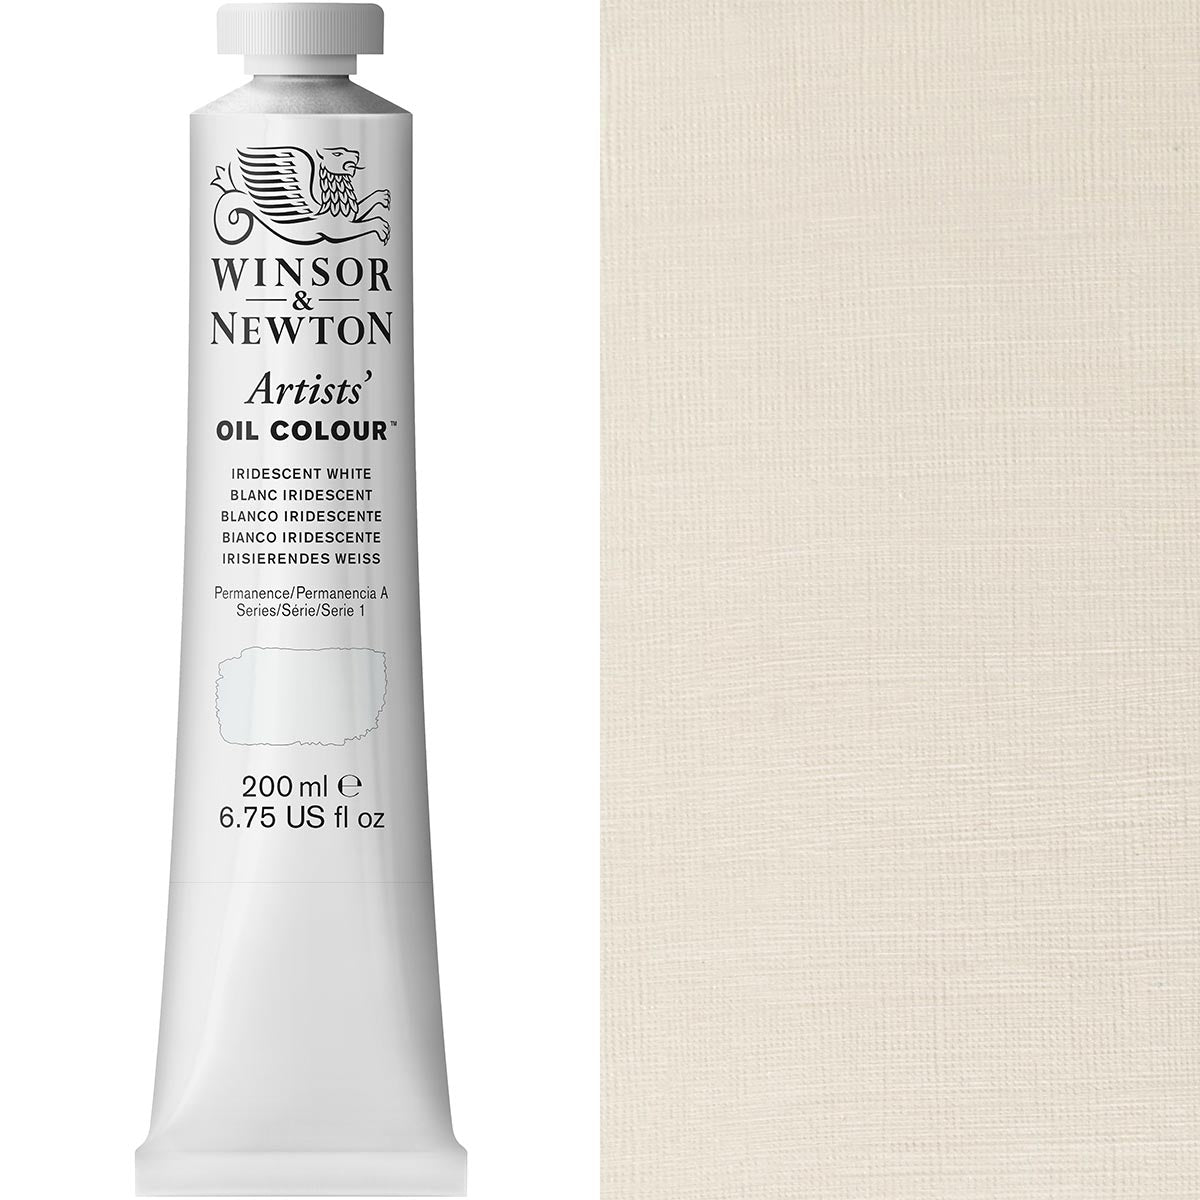 Winsor and Newton - Artists' Oil Colour - 200ml - Iridescent White